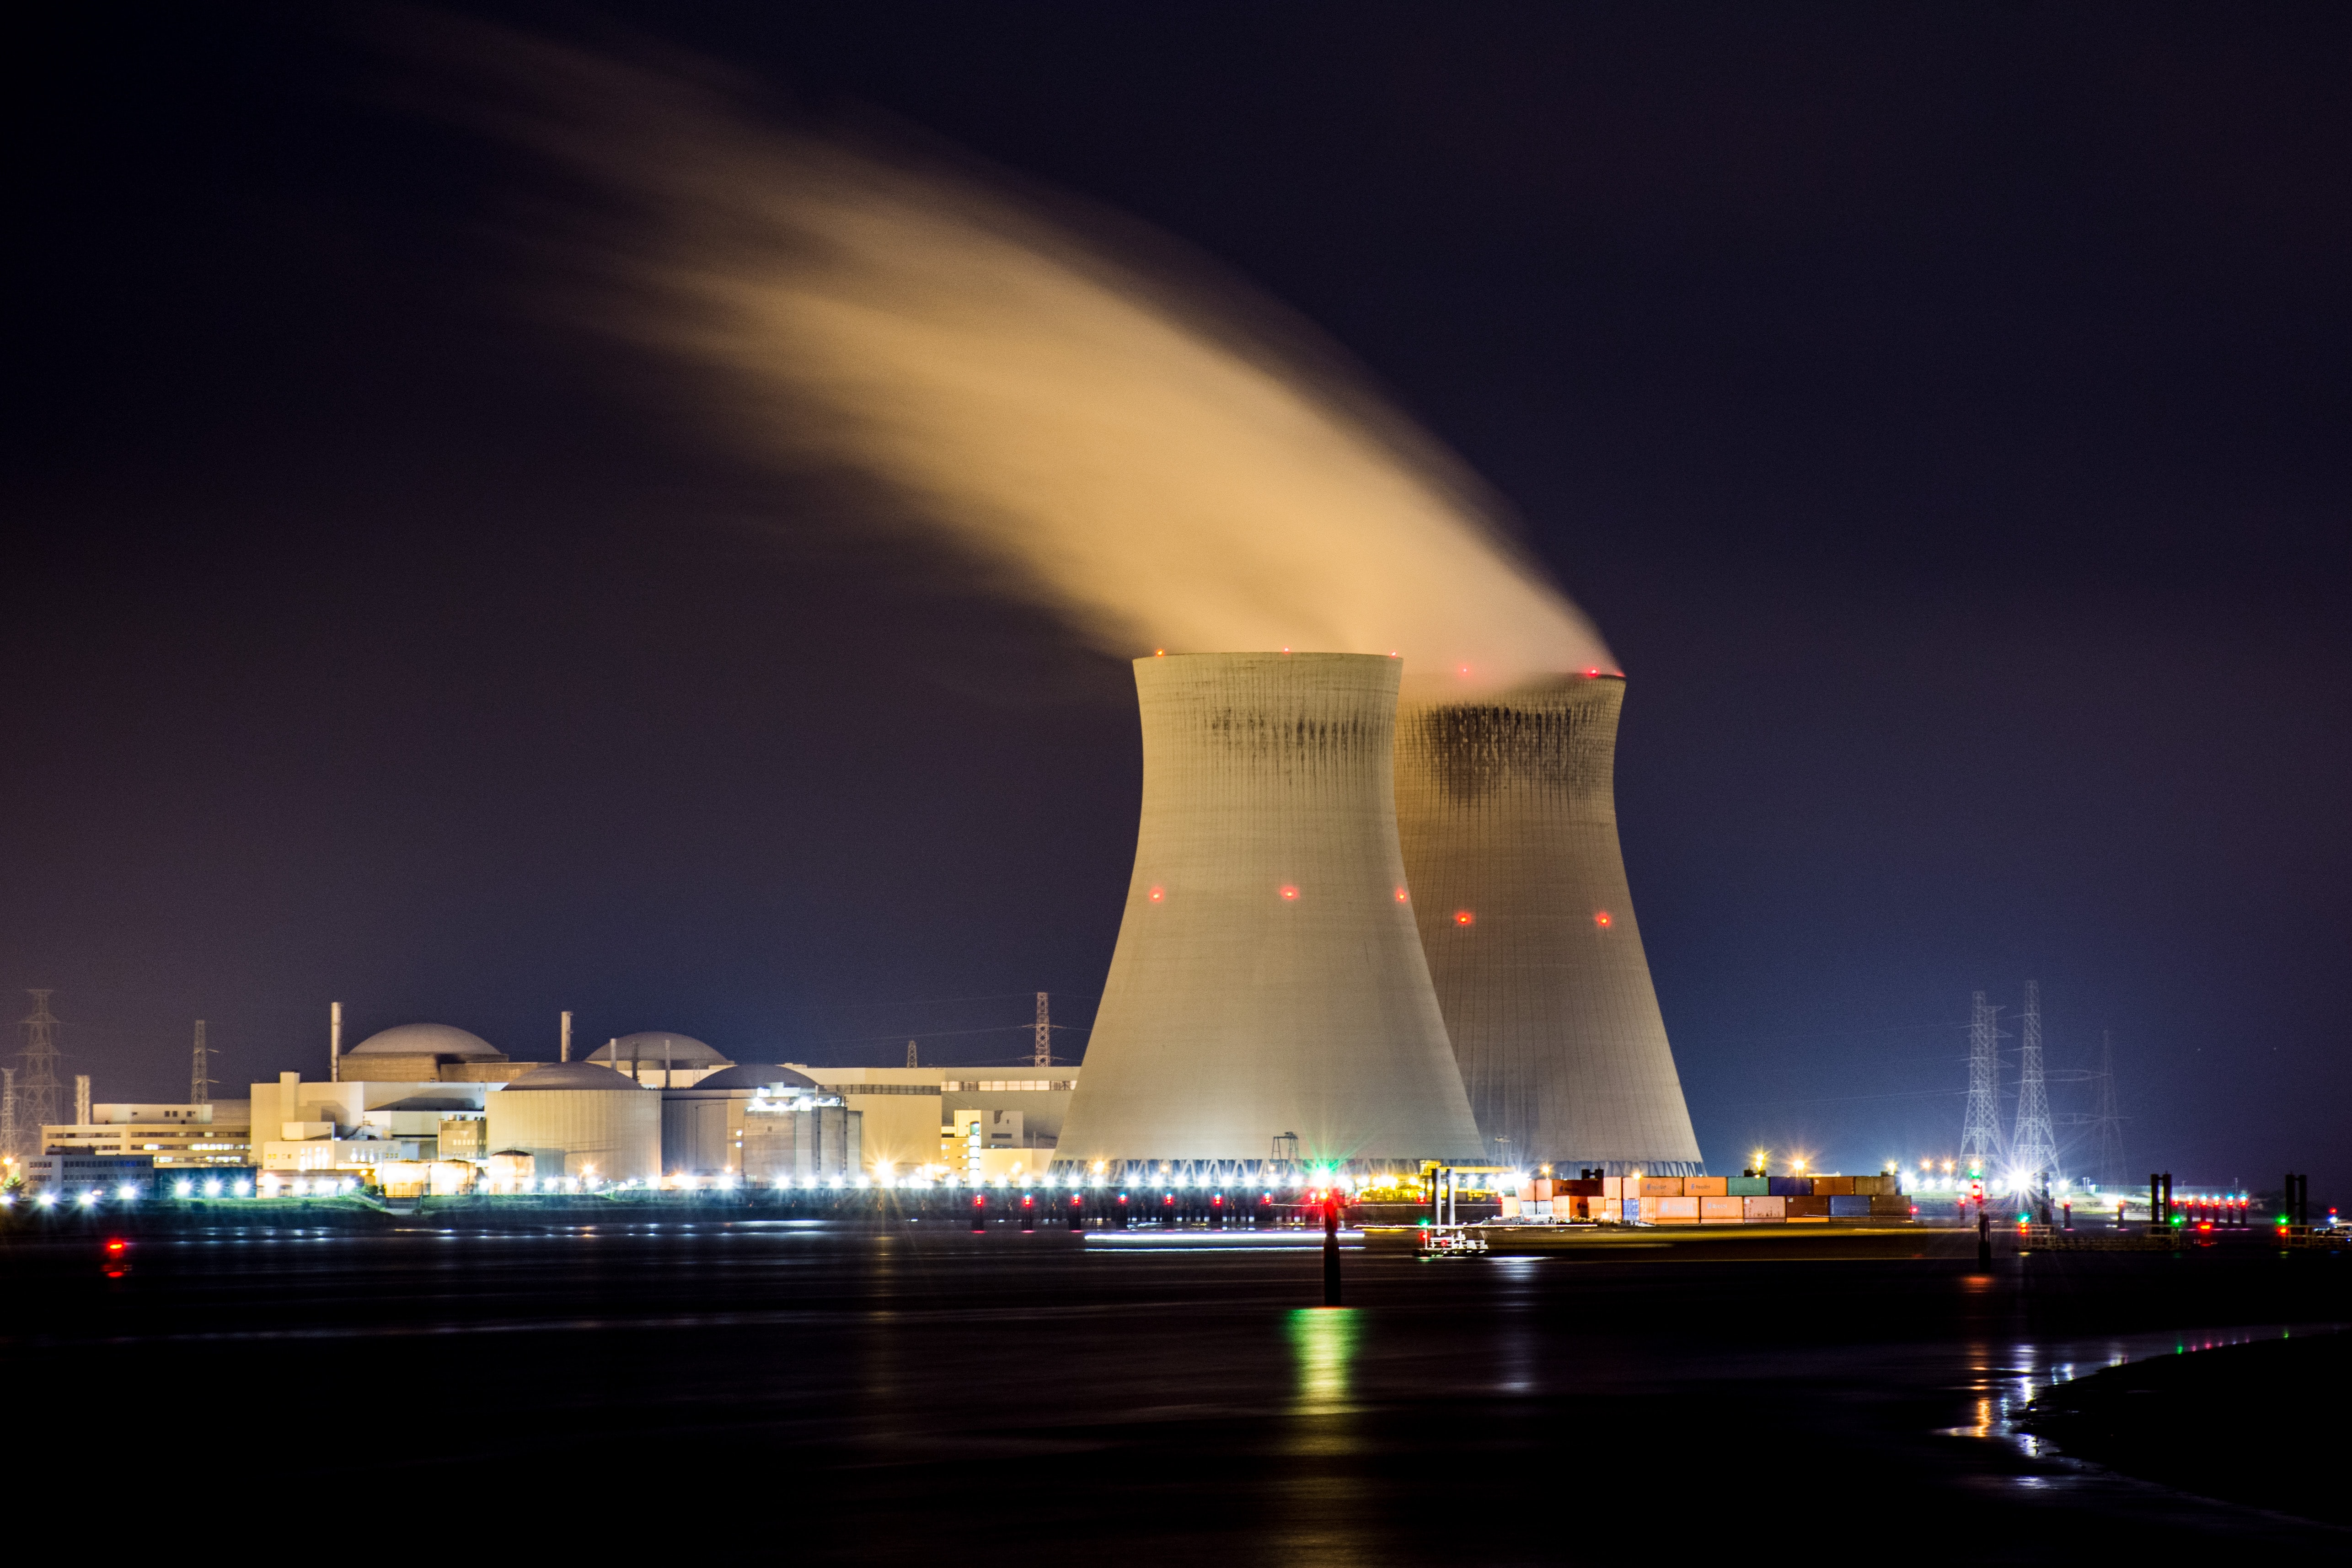 nuclear plant from unsplash